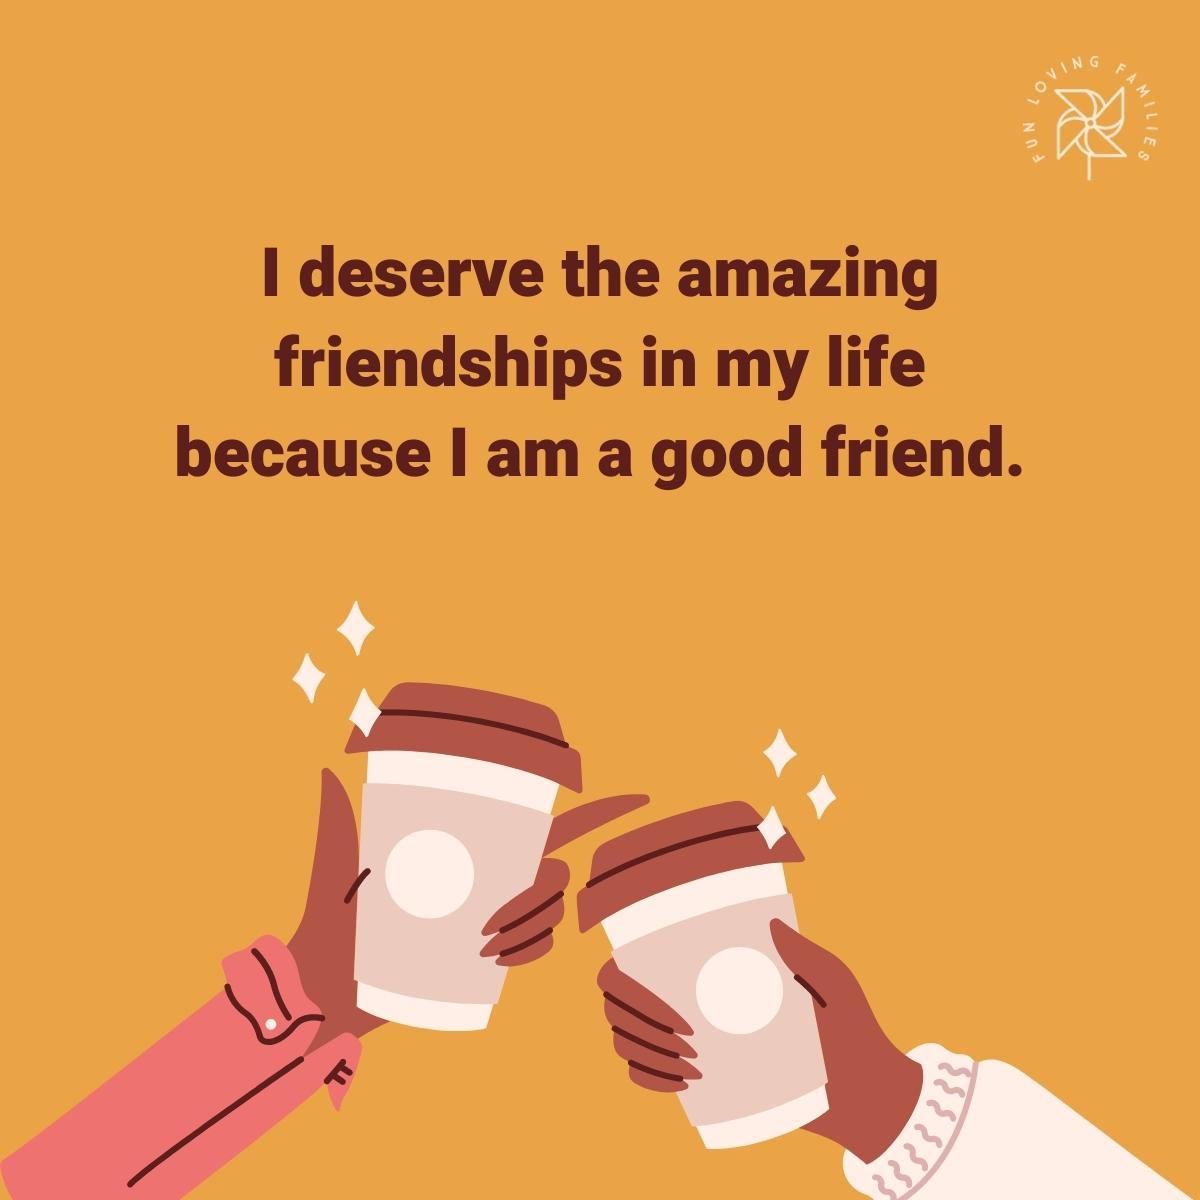 I deserve the amazing friendships in my life because I am a good friend affirmation